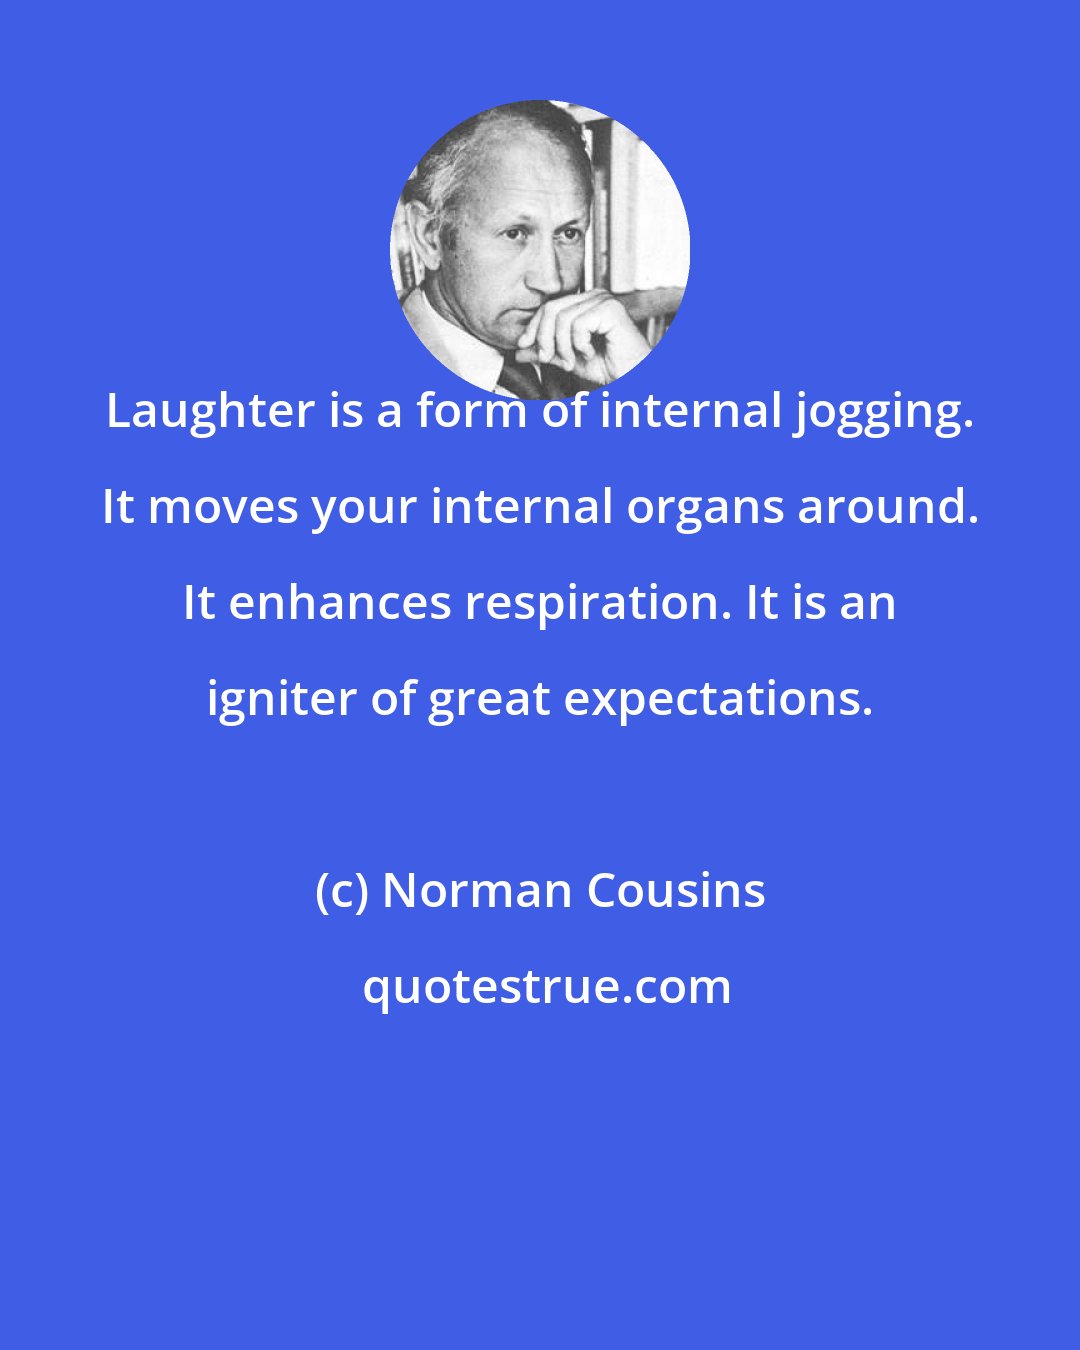 Norman Cousins: Laughter is a form of internal jogging. It moves your internal organs around. It enhances respiration. It is an igniter of great expectations.